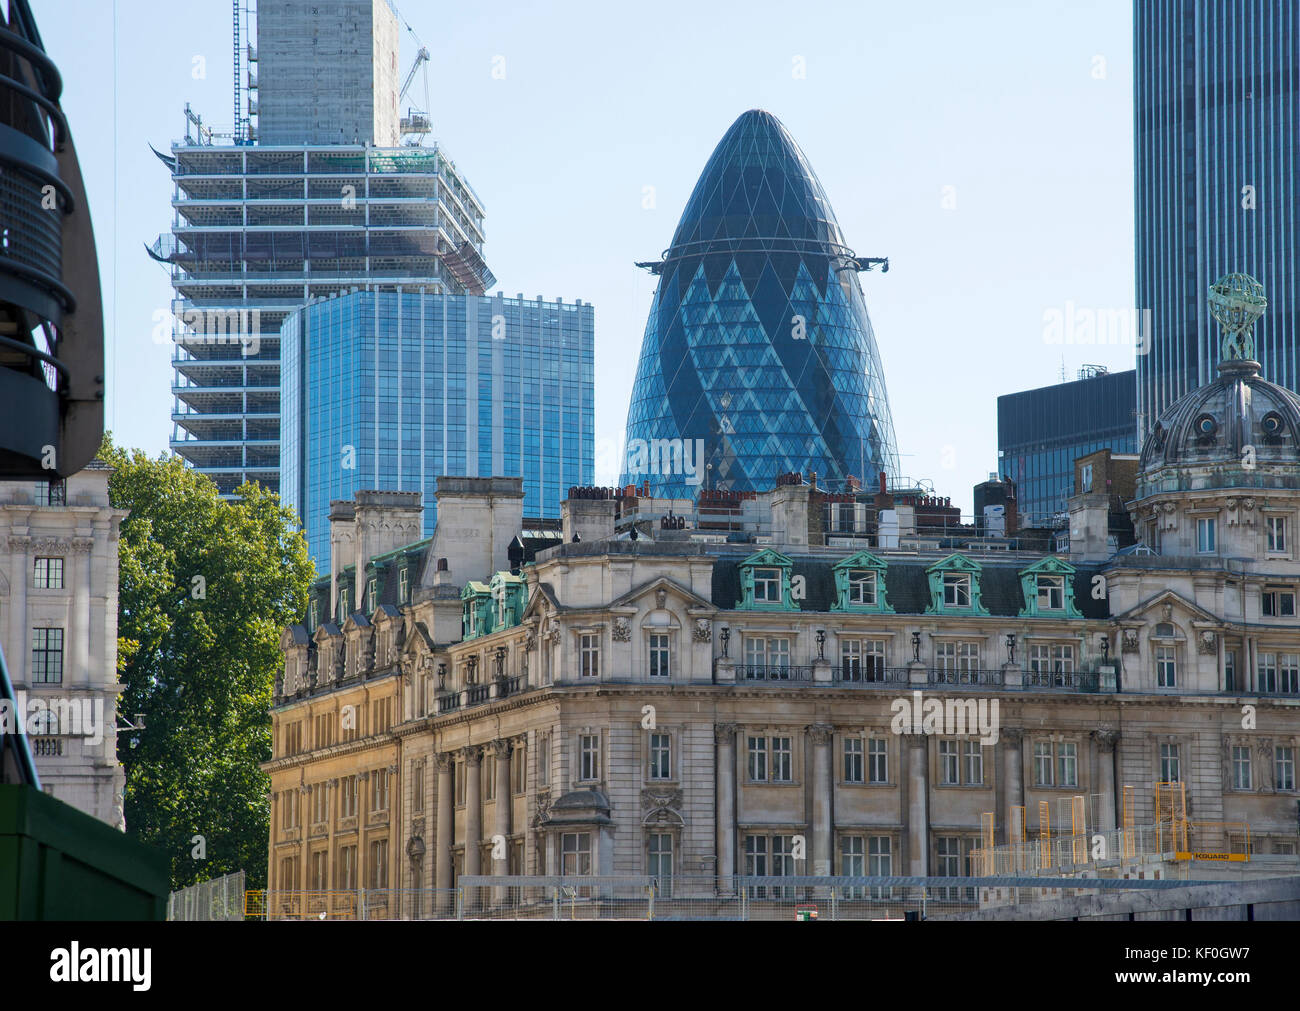 View of the Gherkin building, London. Stock Photo